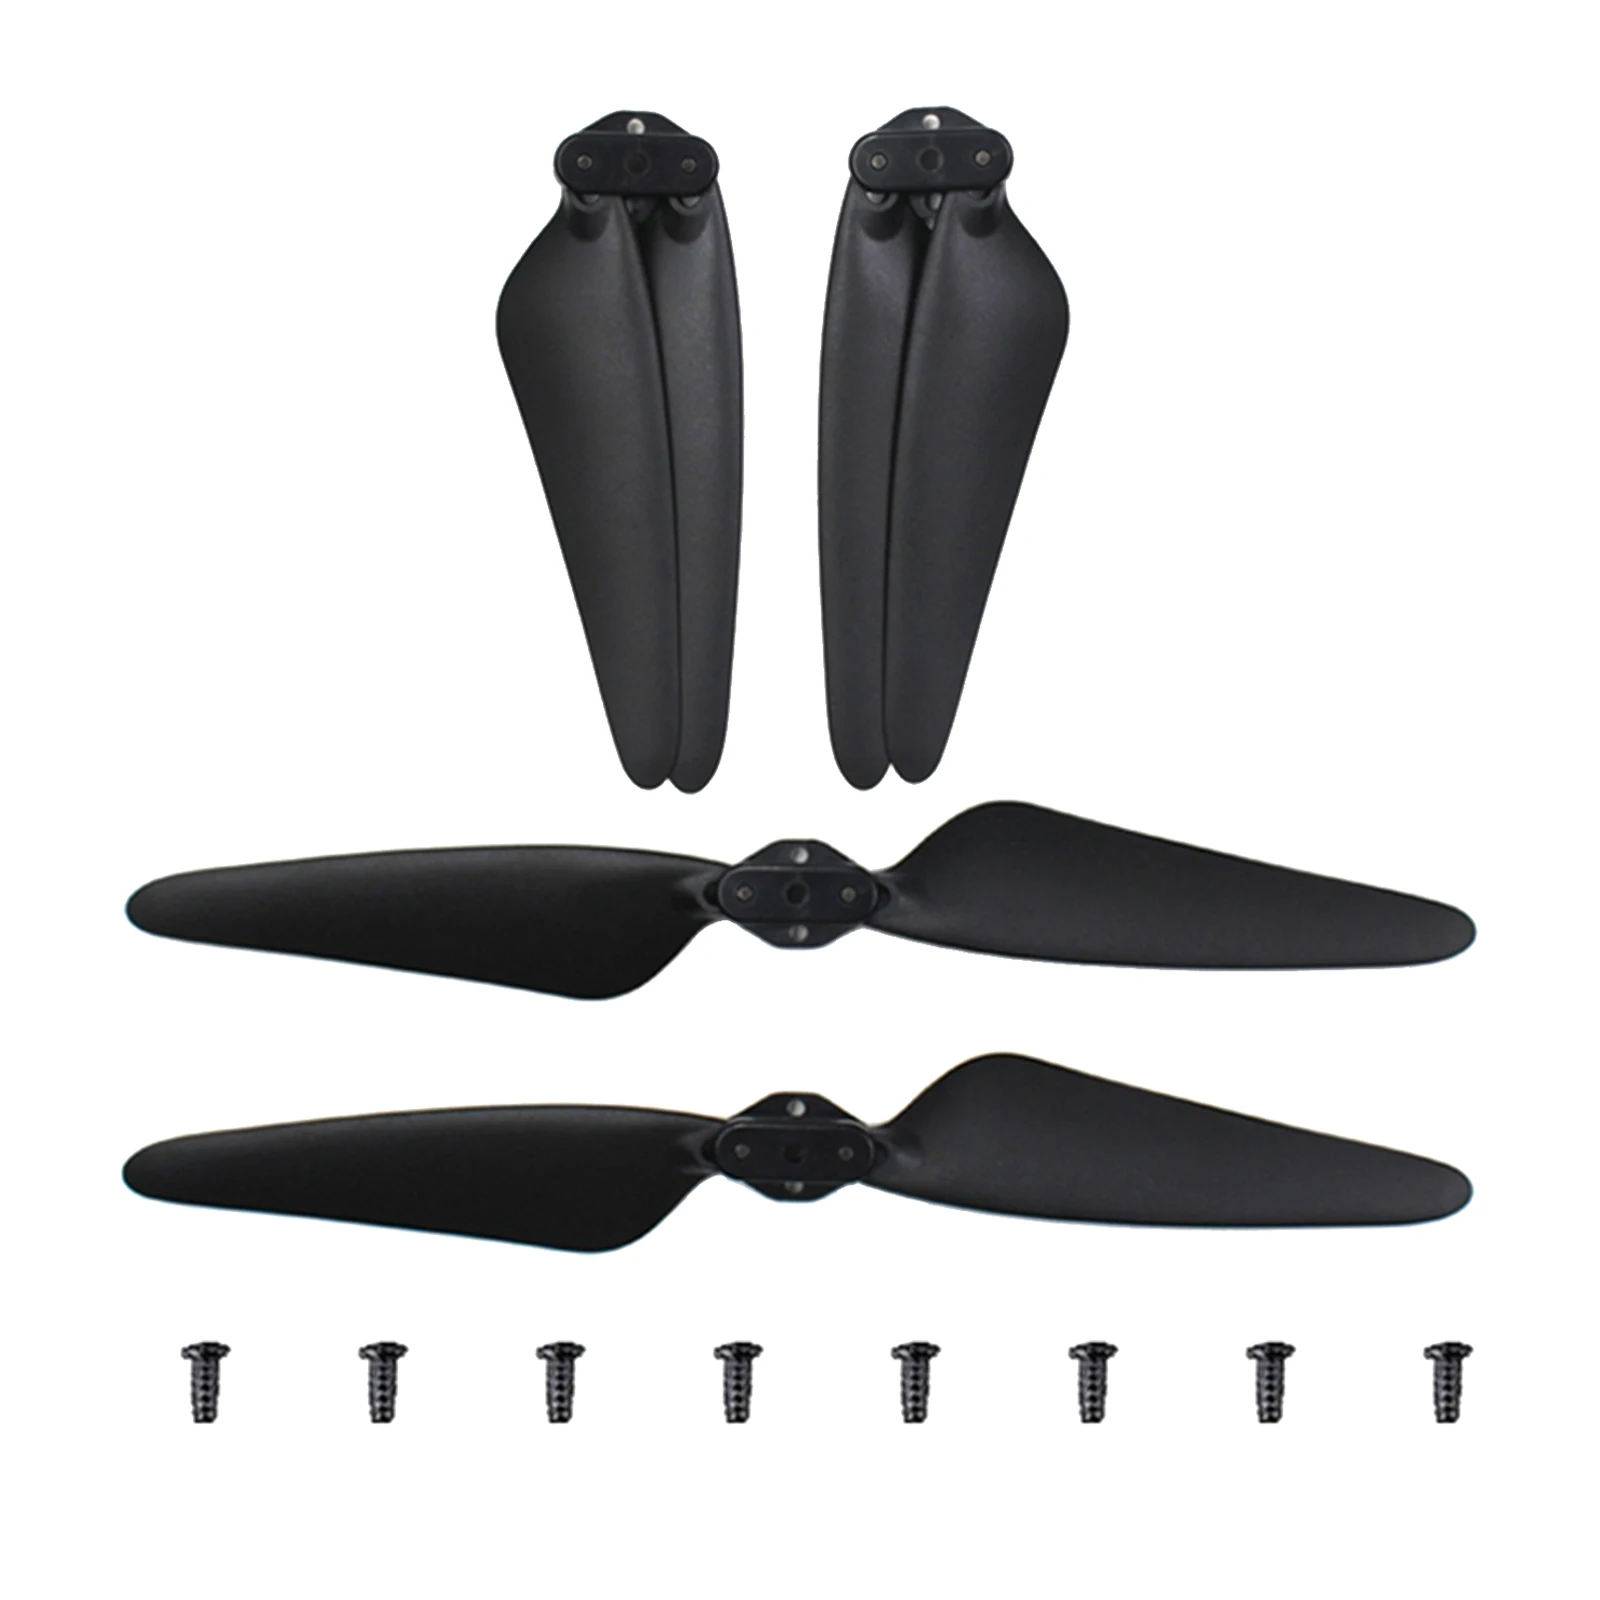 2 Pairs of Replacement Propellers Blades Propeller for SG906 Pro RC Drone Quadcopter Props Blade Accessory Spare Parts